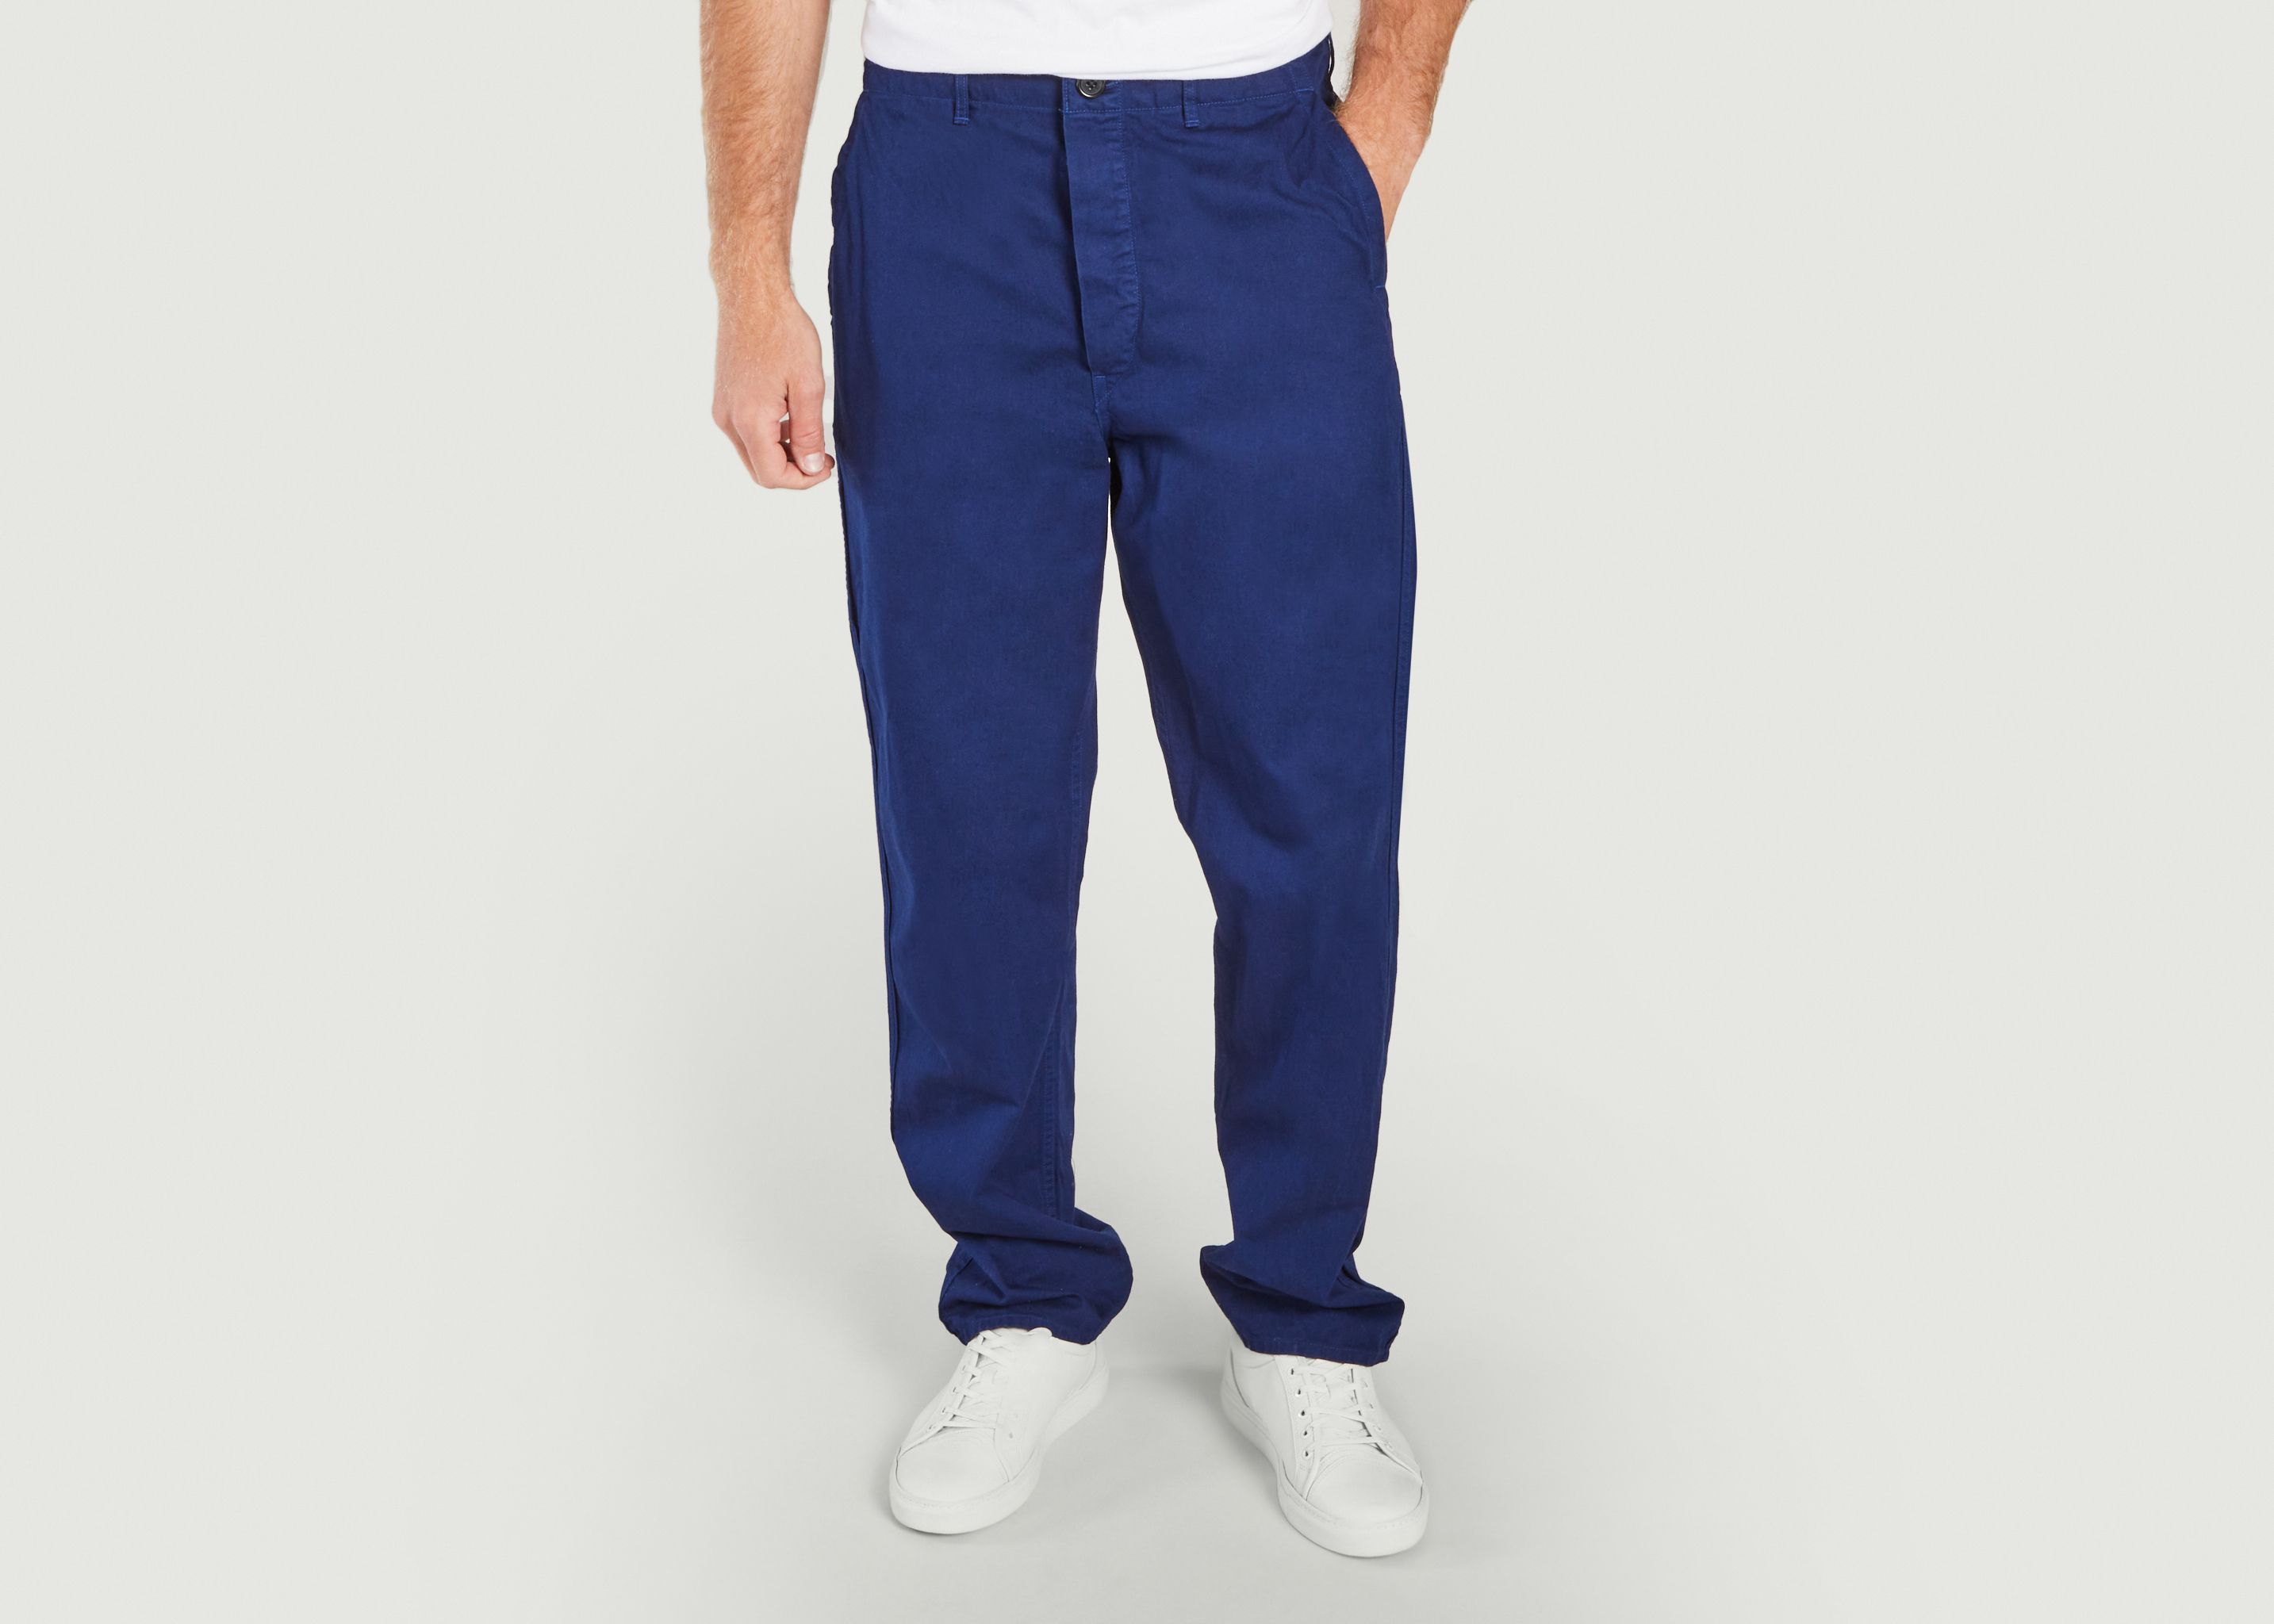 Unisex French Work Pants - orSlow